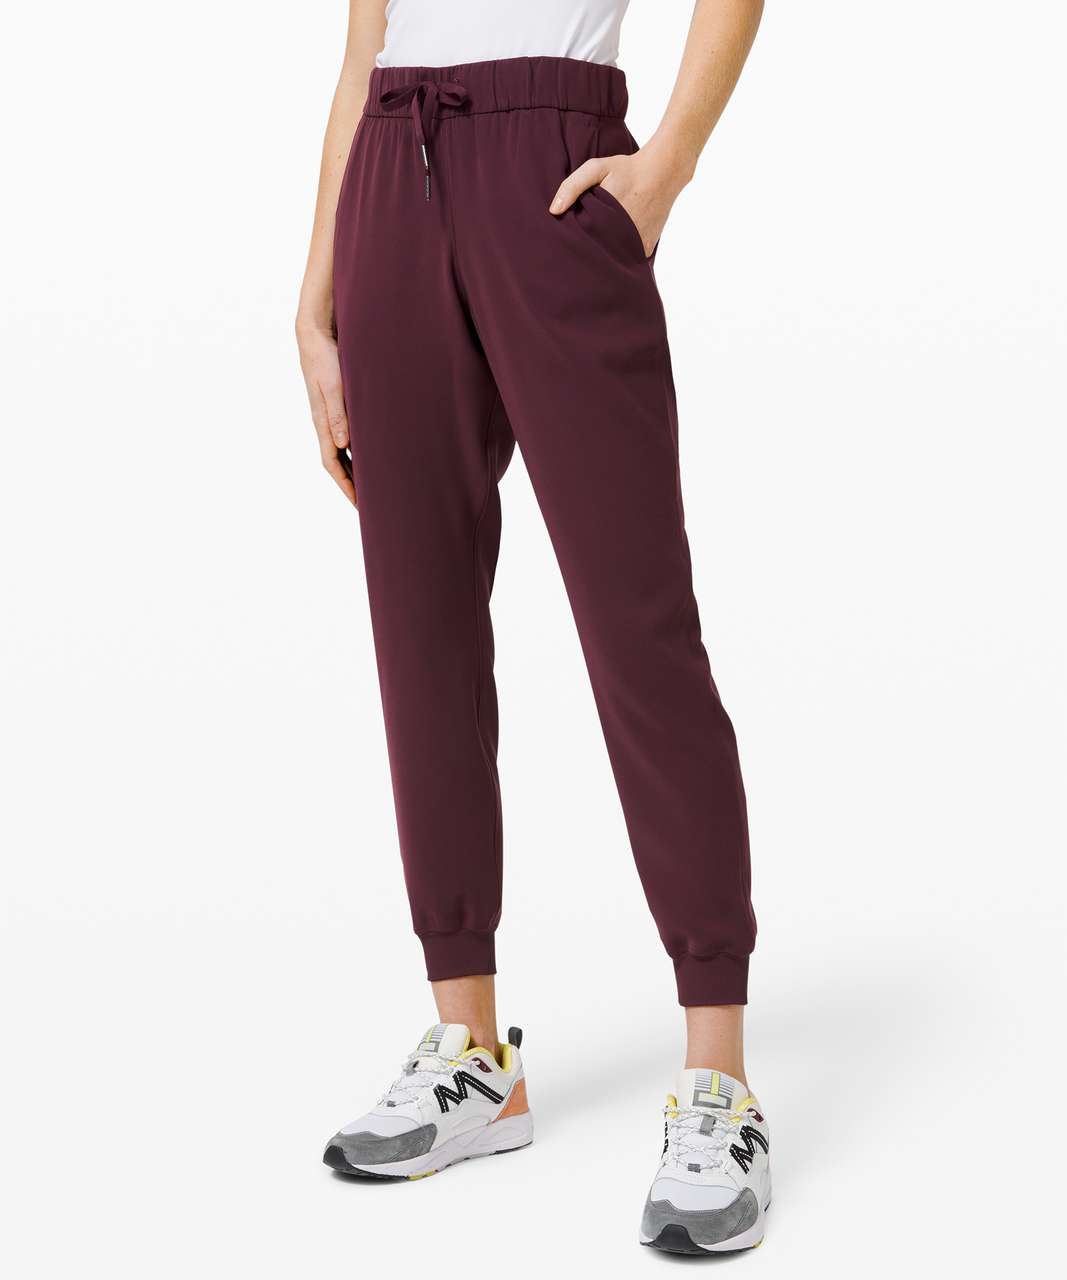 Lululemon On The Fly Jogger Silverscreen Size 2 - $63 (46% Off Retail) -  From Sherry